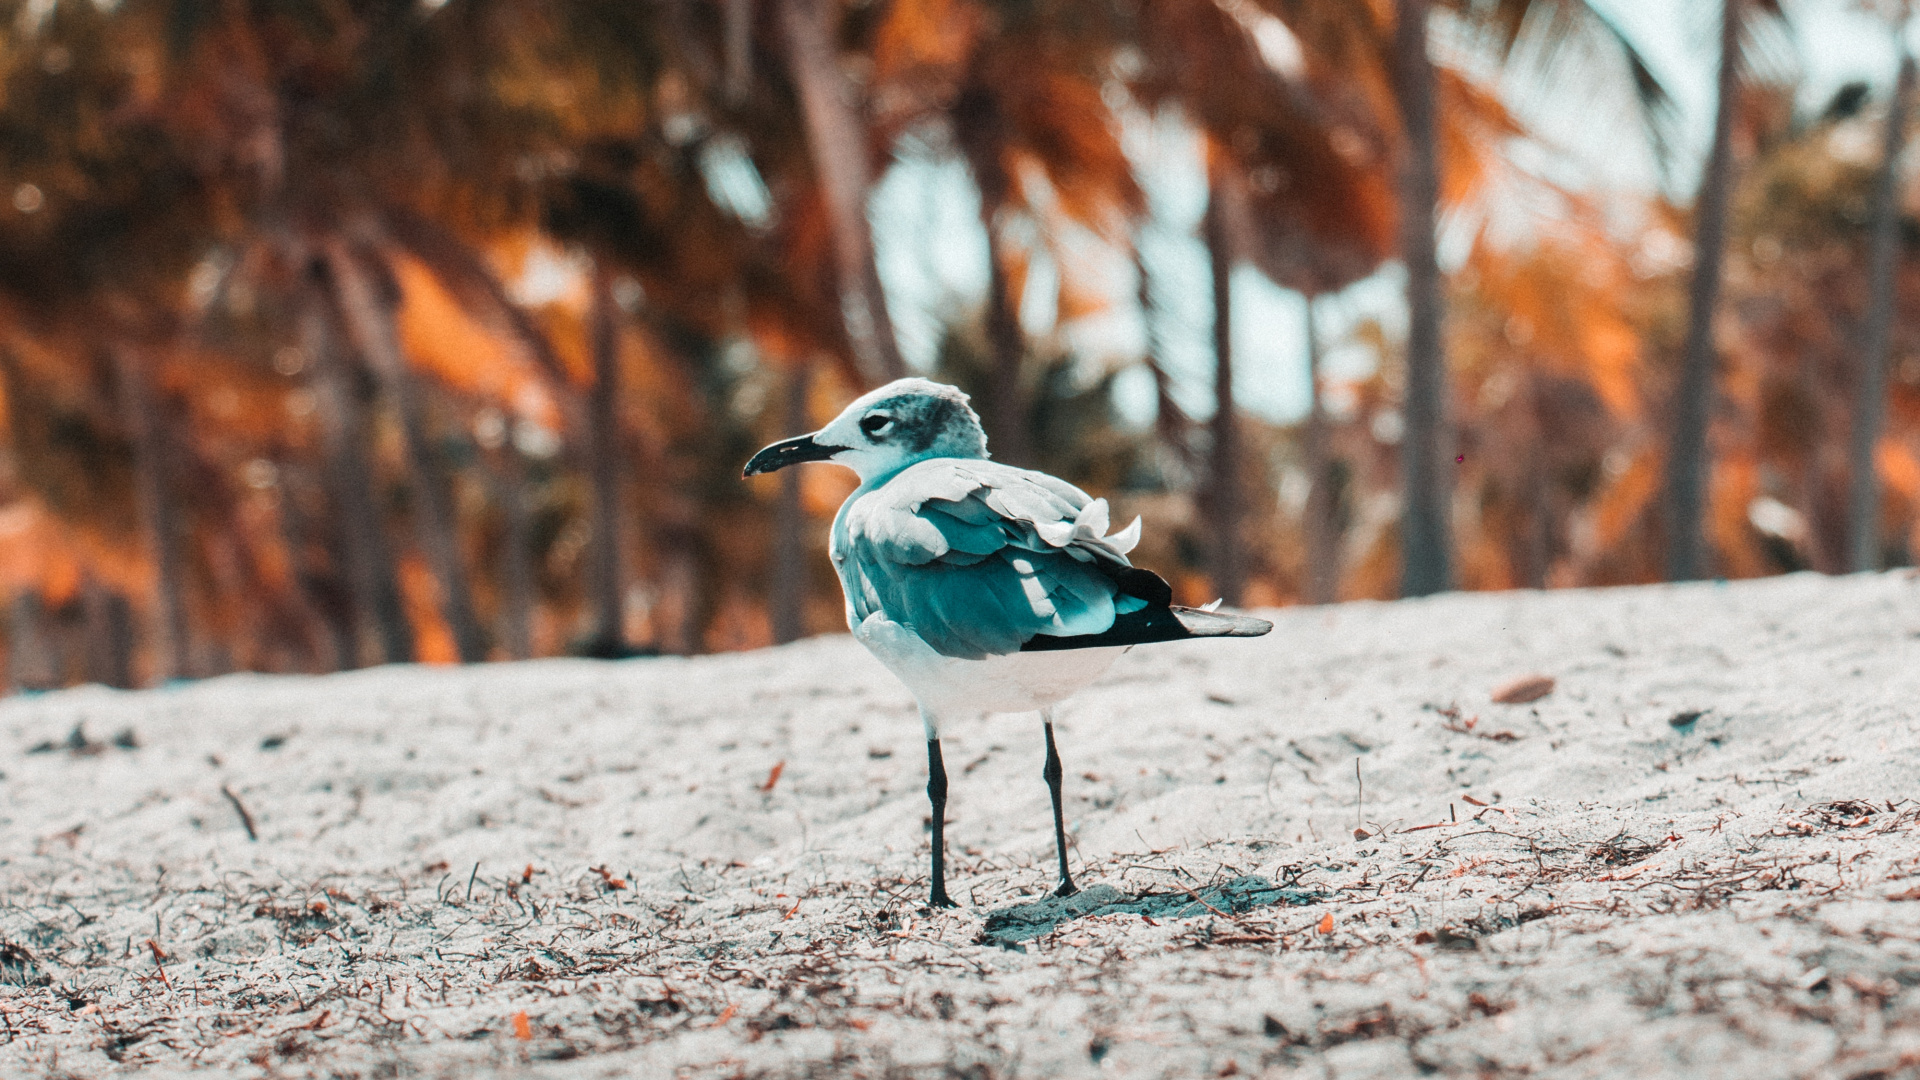 Blue and White Bird on Gray Sand During Daytime. Wallpaper in 1920x1080 Resolution